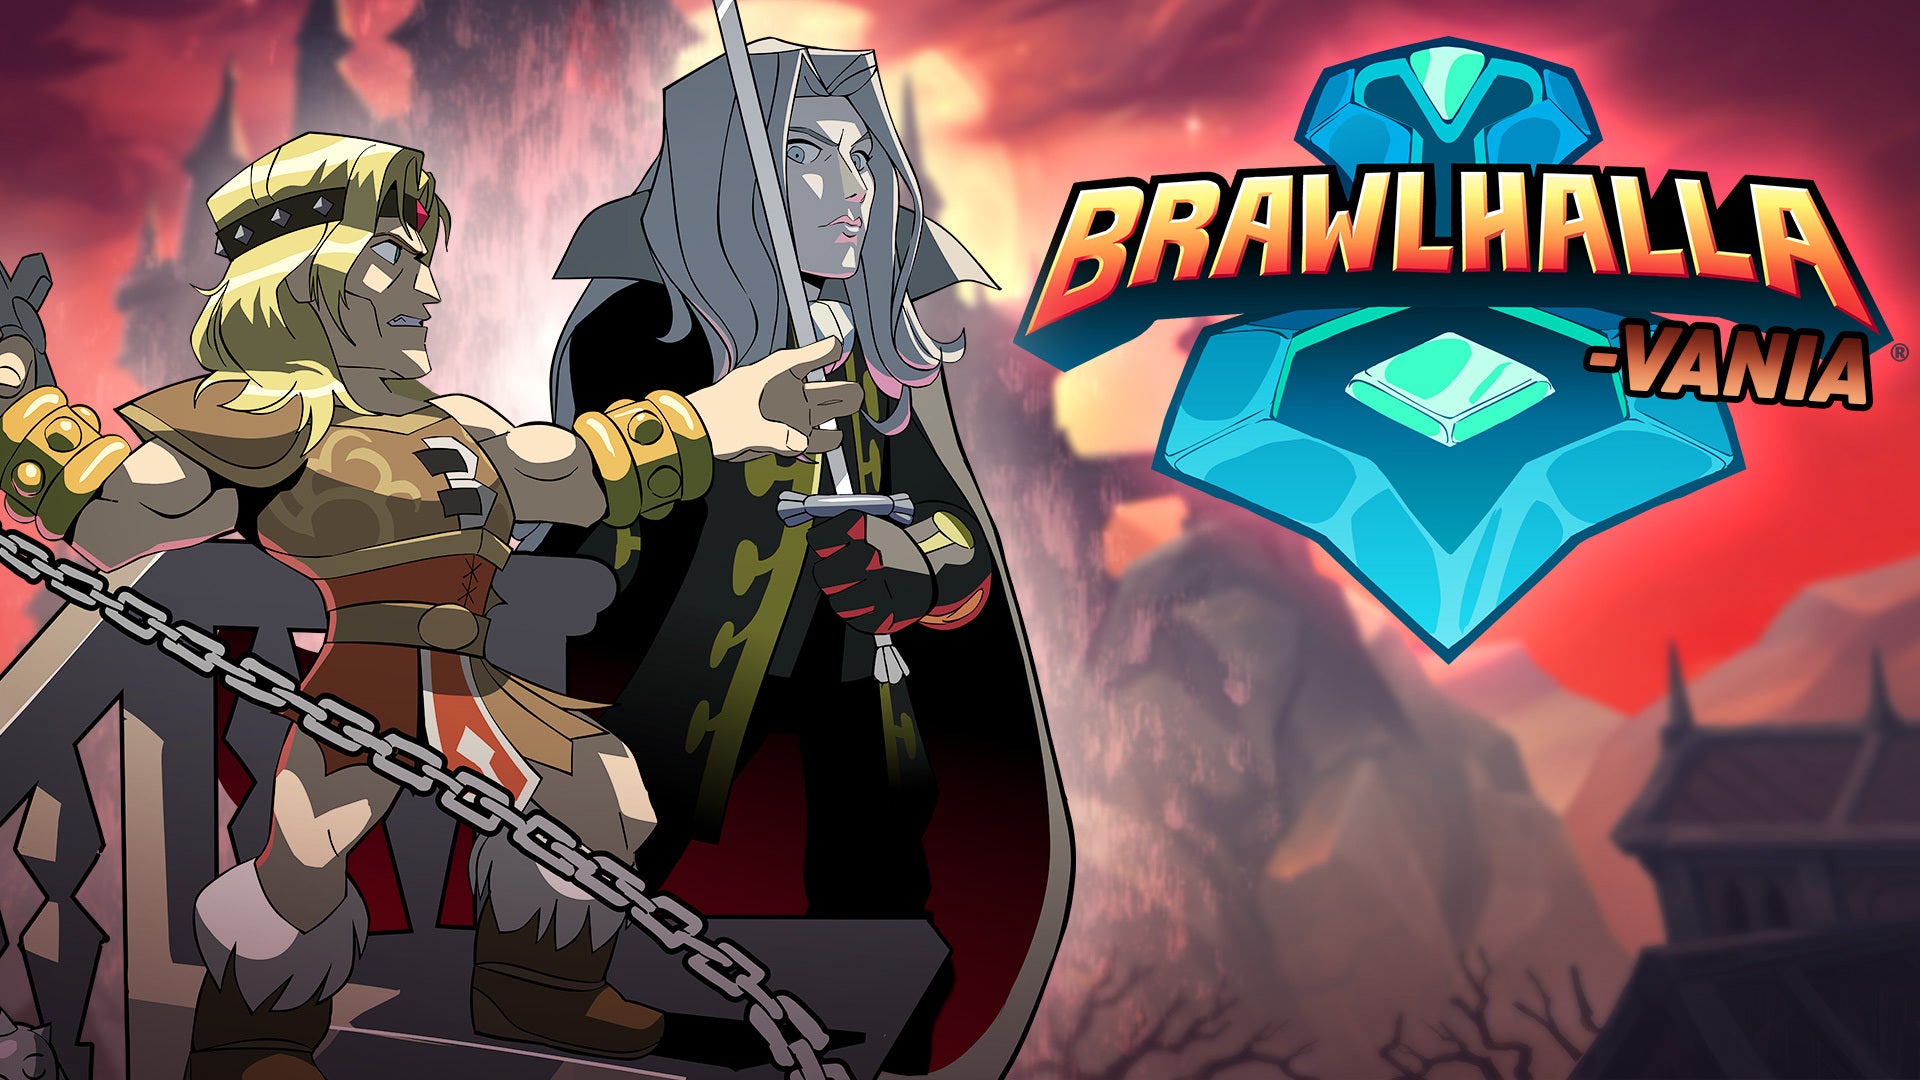 Simon Belmont and Alucard are paying a visit to Brawlhalla over Halloween |  